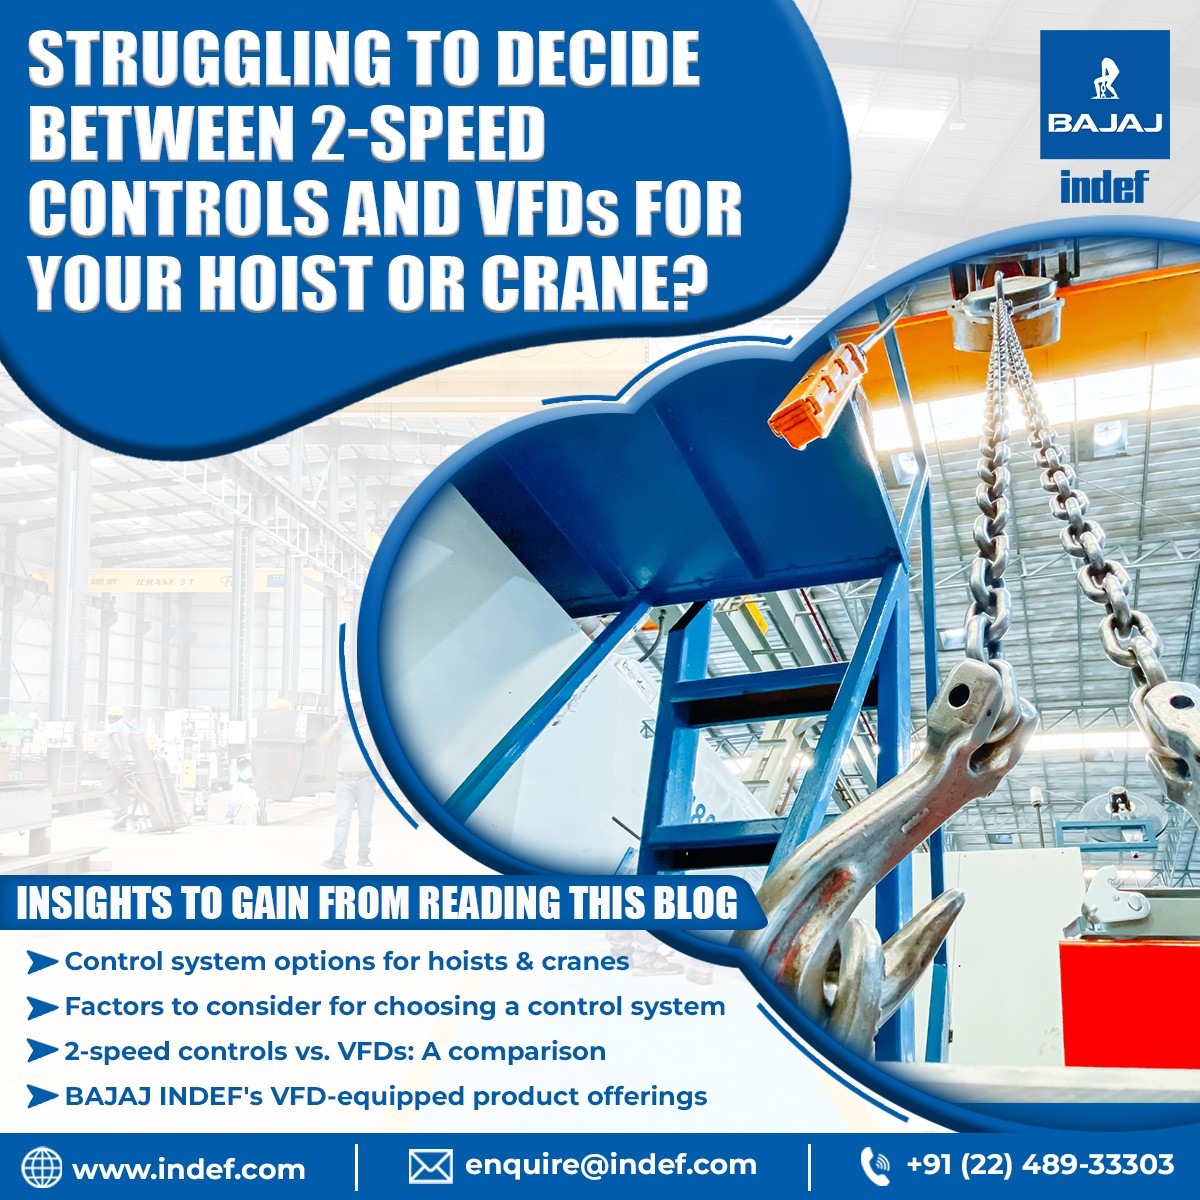 Which Control System is Best for Your Hoist or Crane: 2-Speed Controls or VFDs?